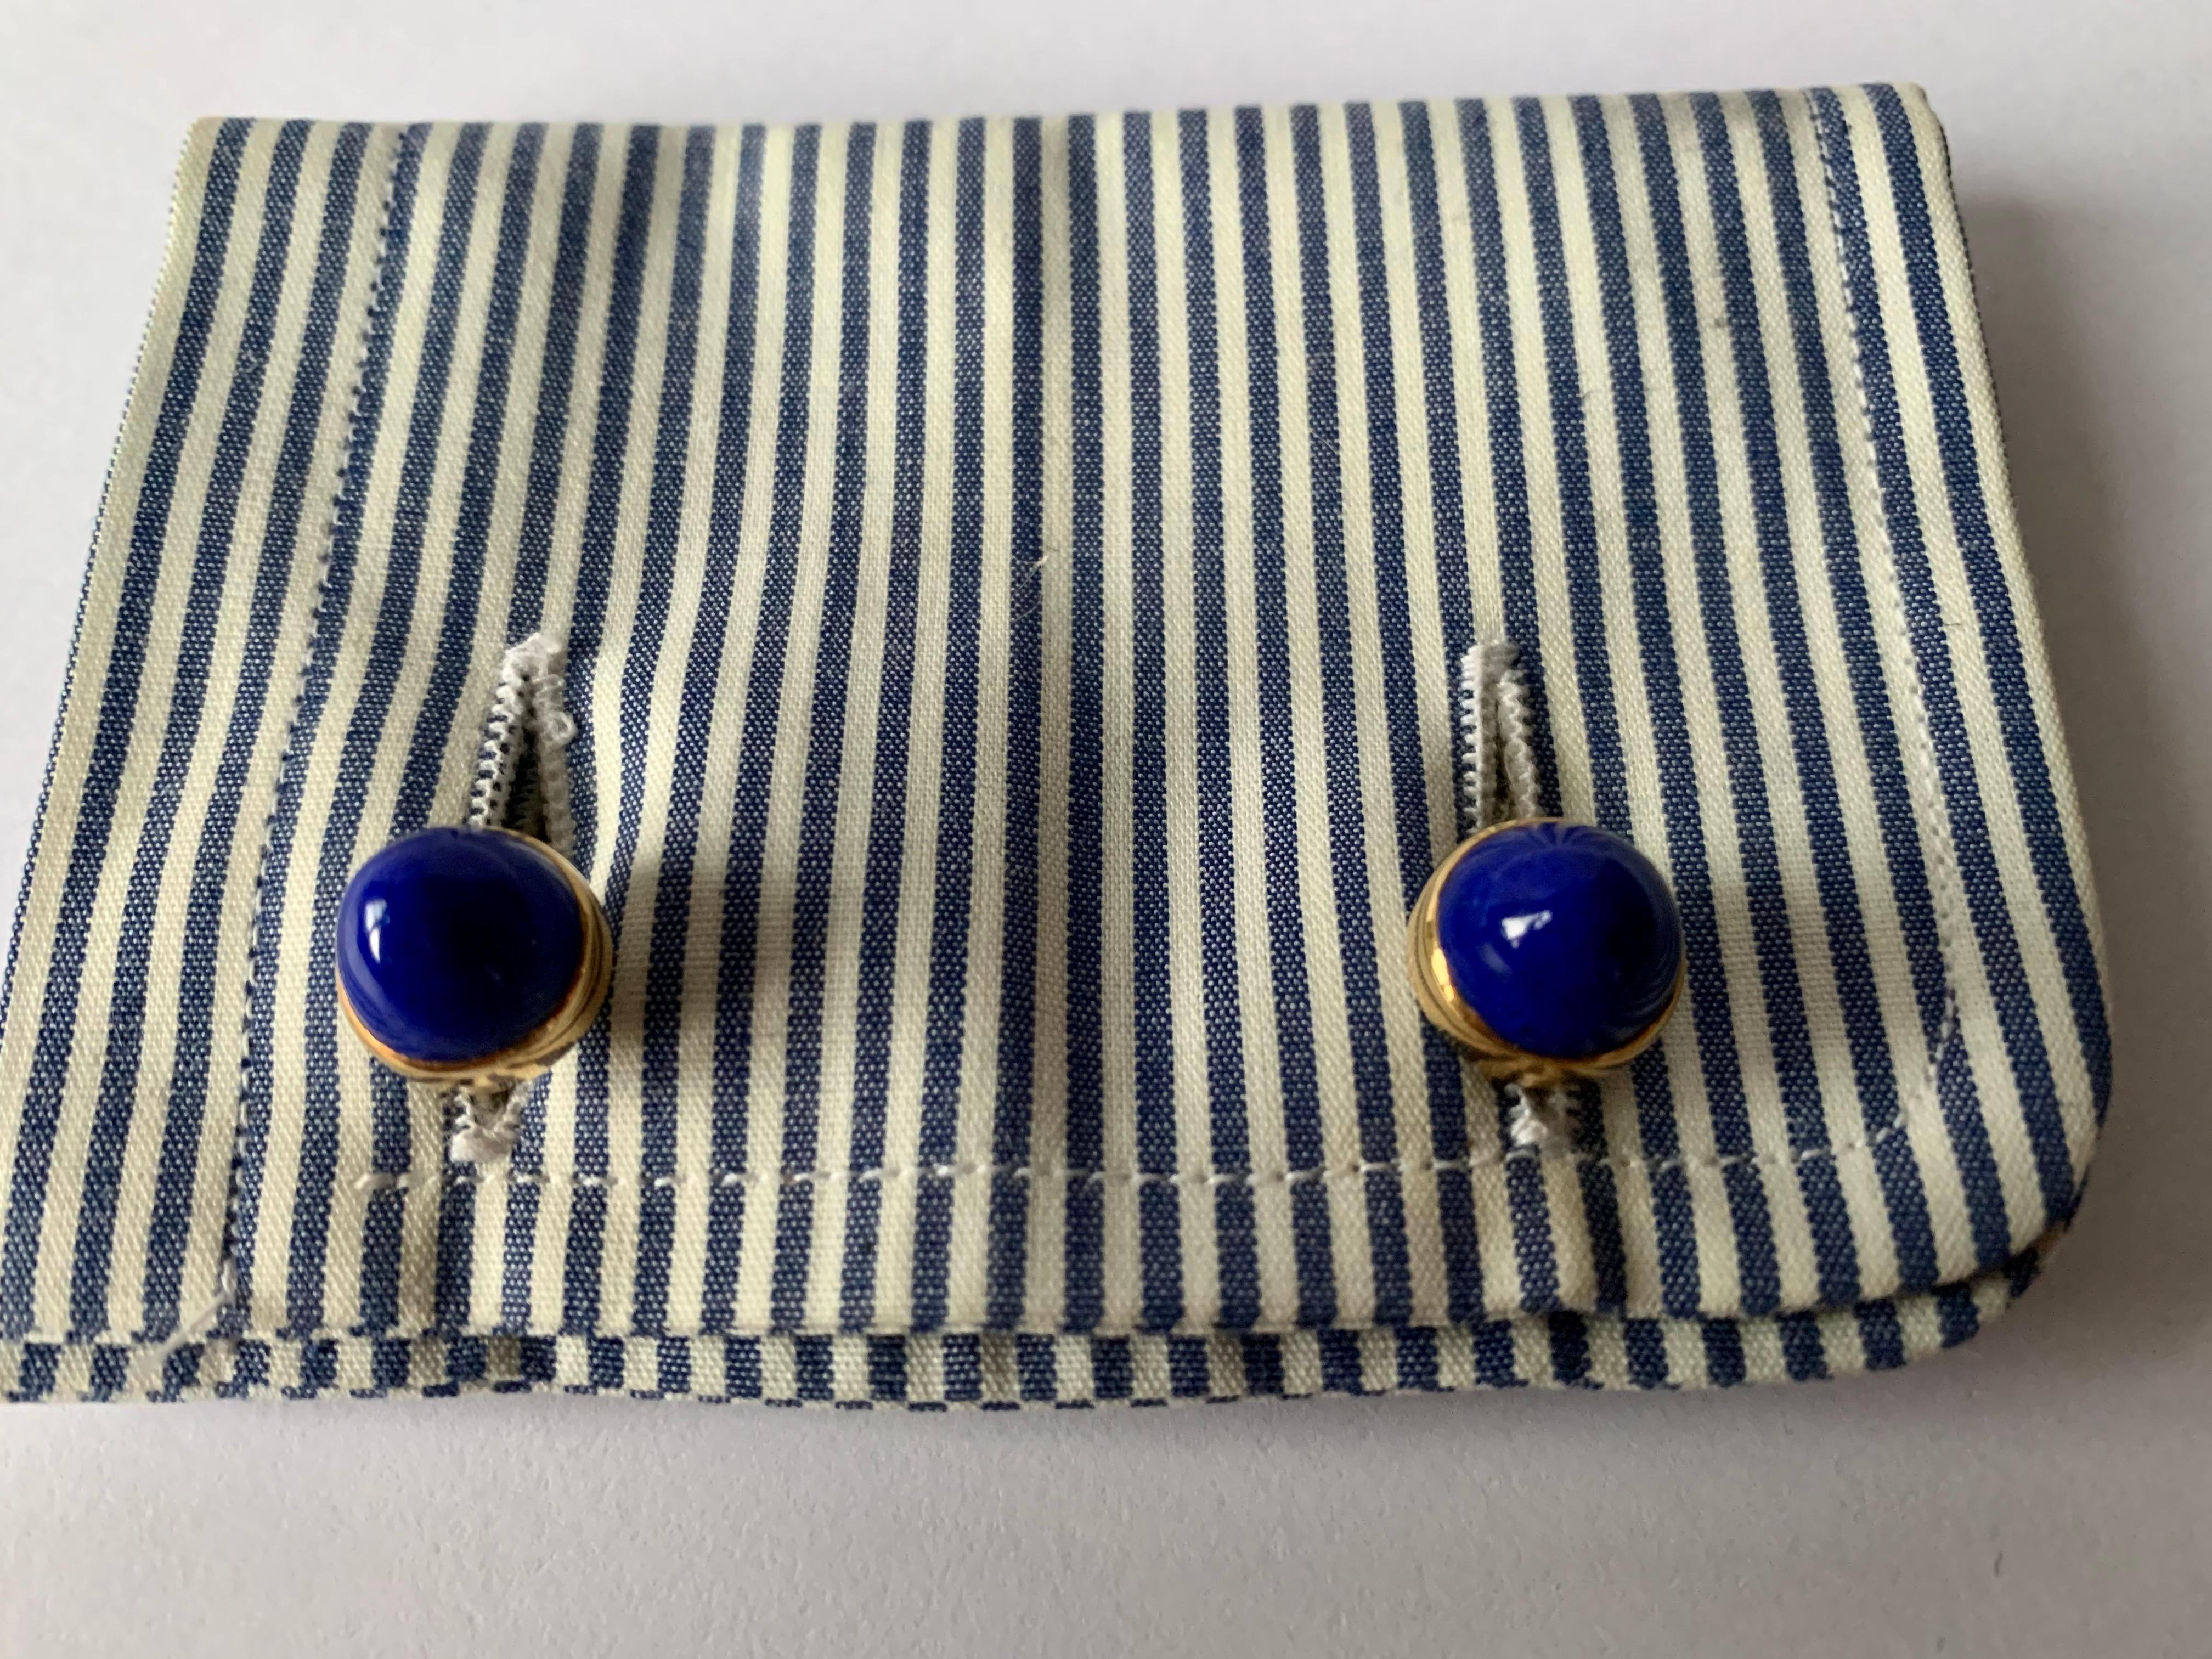 A pair of very attractive 18 K yellow Gold cufflinks with blue Enamel, 8 blue Sapphires weighing 0.70 ct and accentuated with 32 brilliant cut Diamonds weighing 0.30 ct. 
The back part of the cufflinks are 2 dome shaped Lapis Lazuli Cabochons.